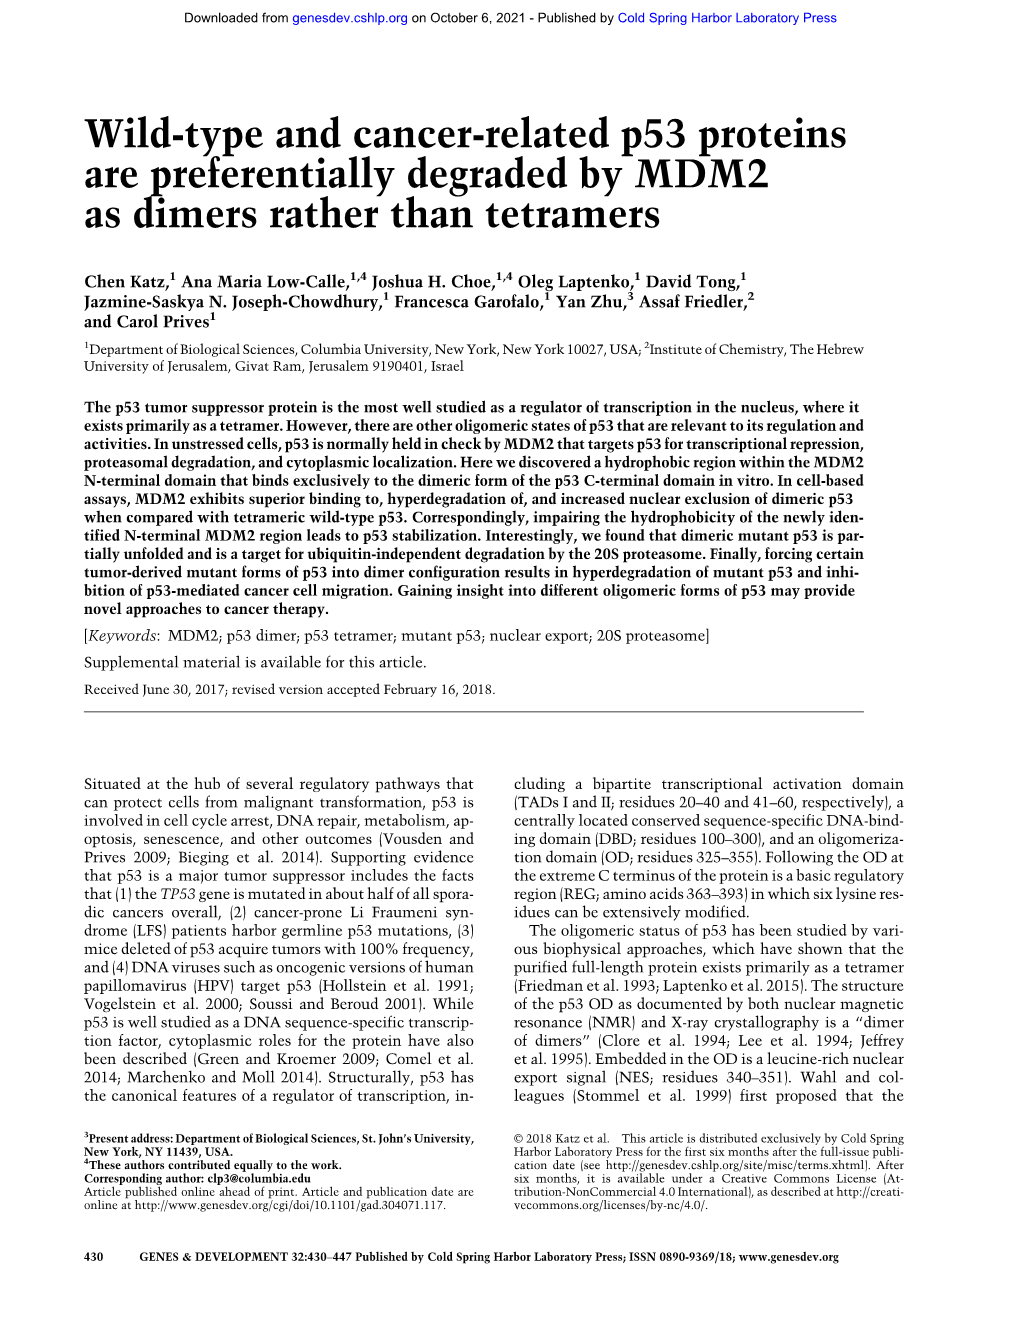 Wild-Type and Cancer-Related P53 Proteins Are Preferentially Degraded by MDM2 As Dimers Rather Than Tetramers